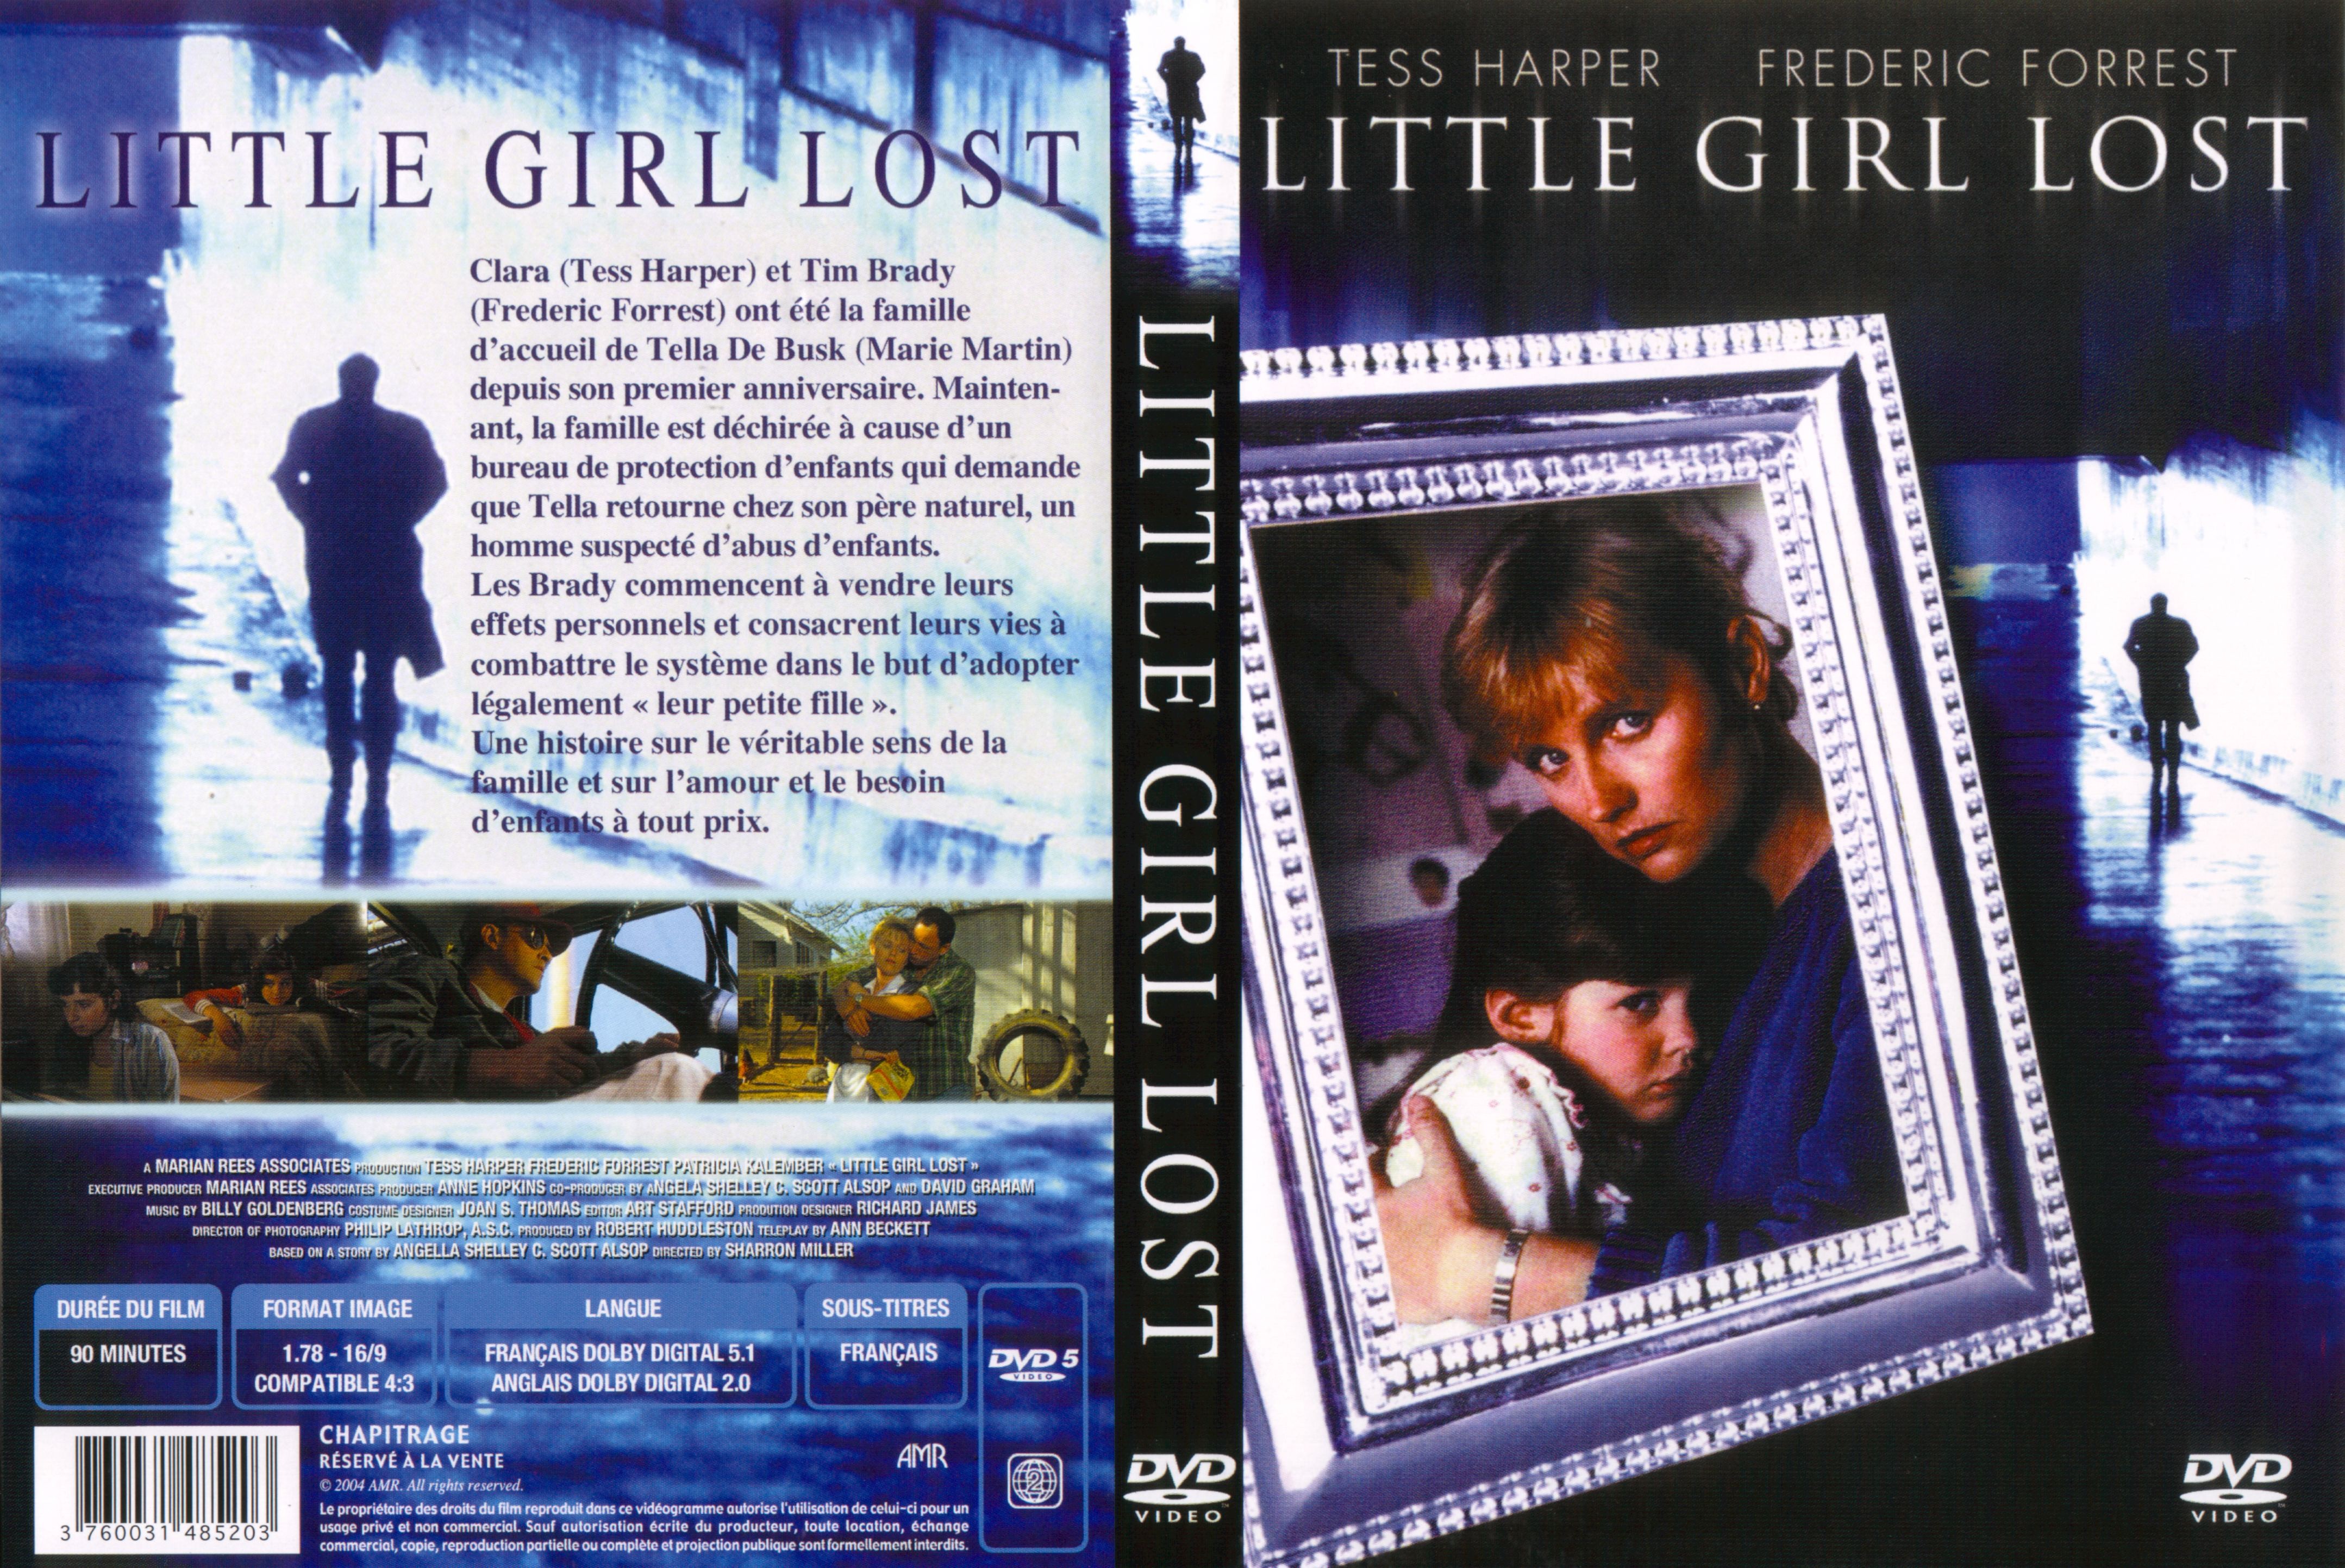 Jaquette DVD Little girl lost